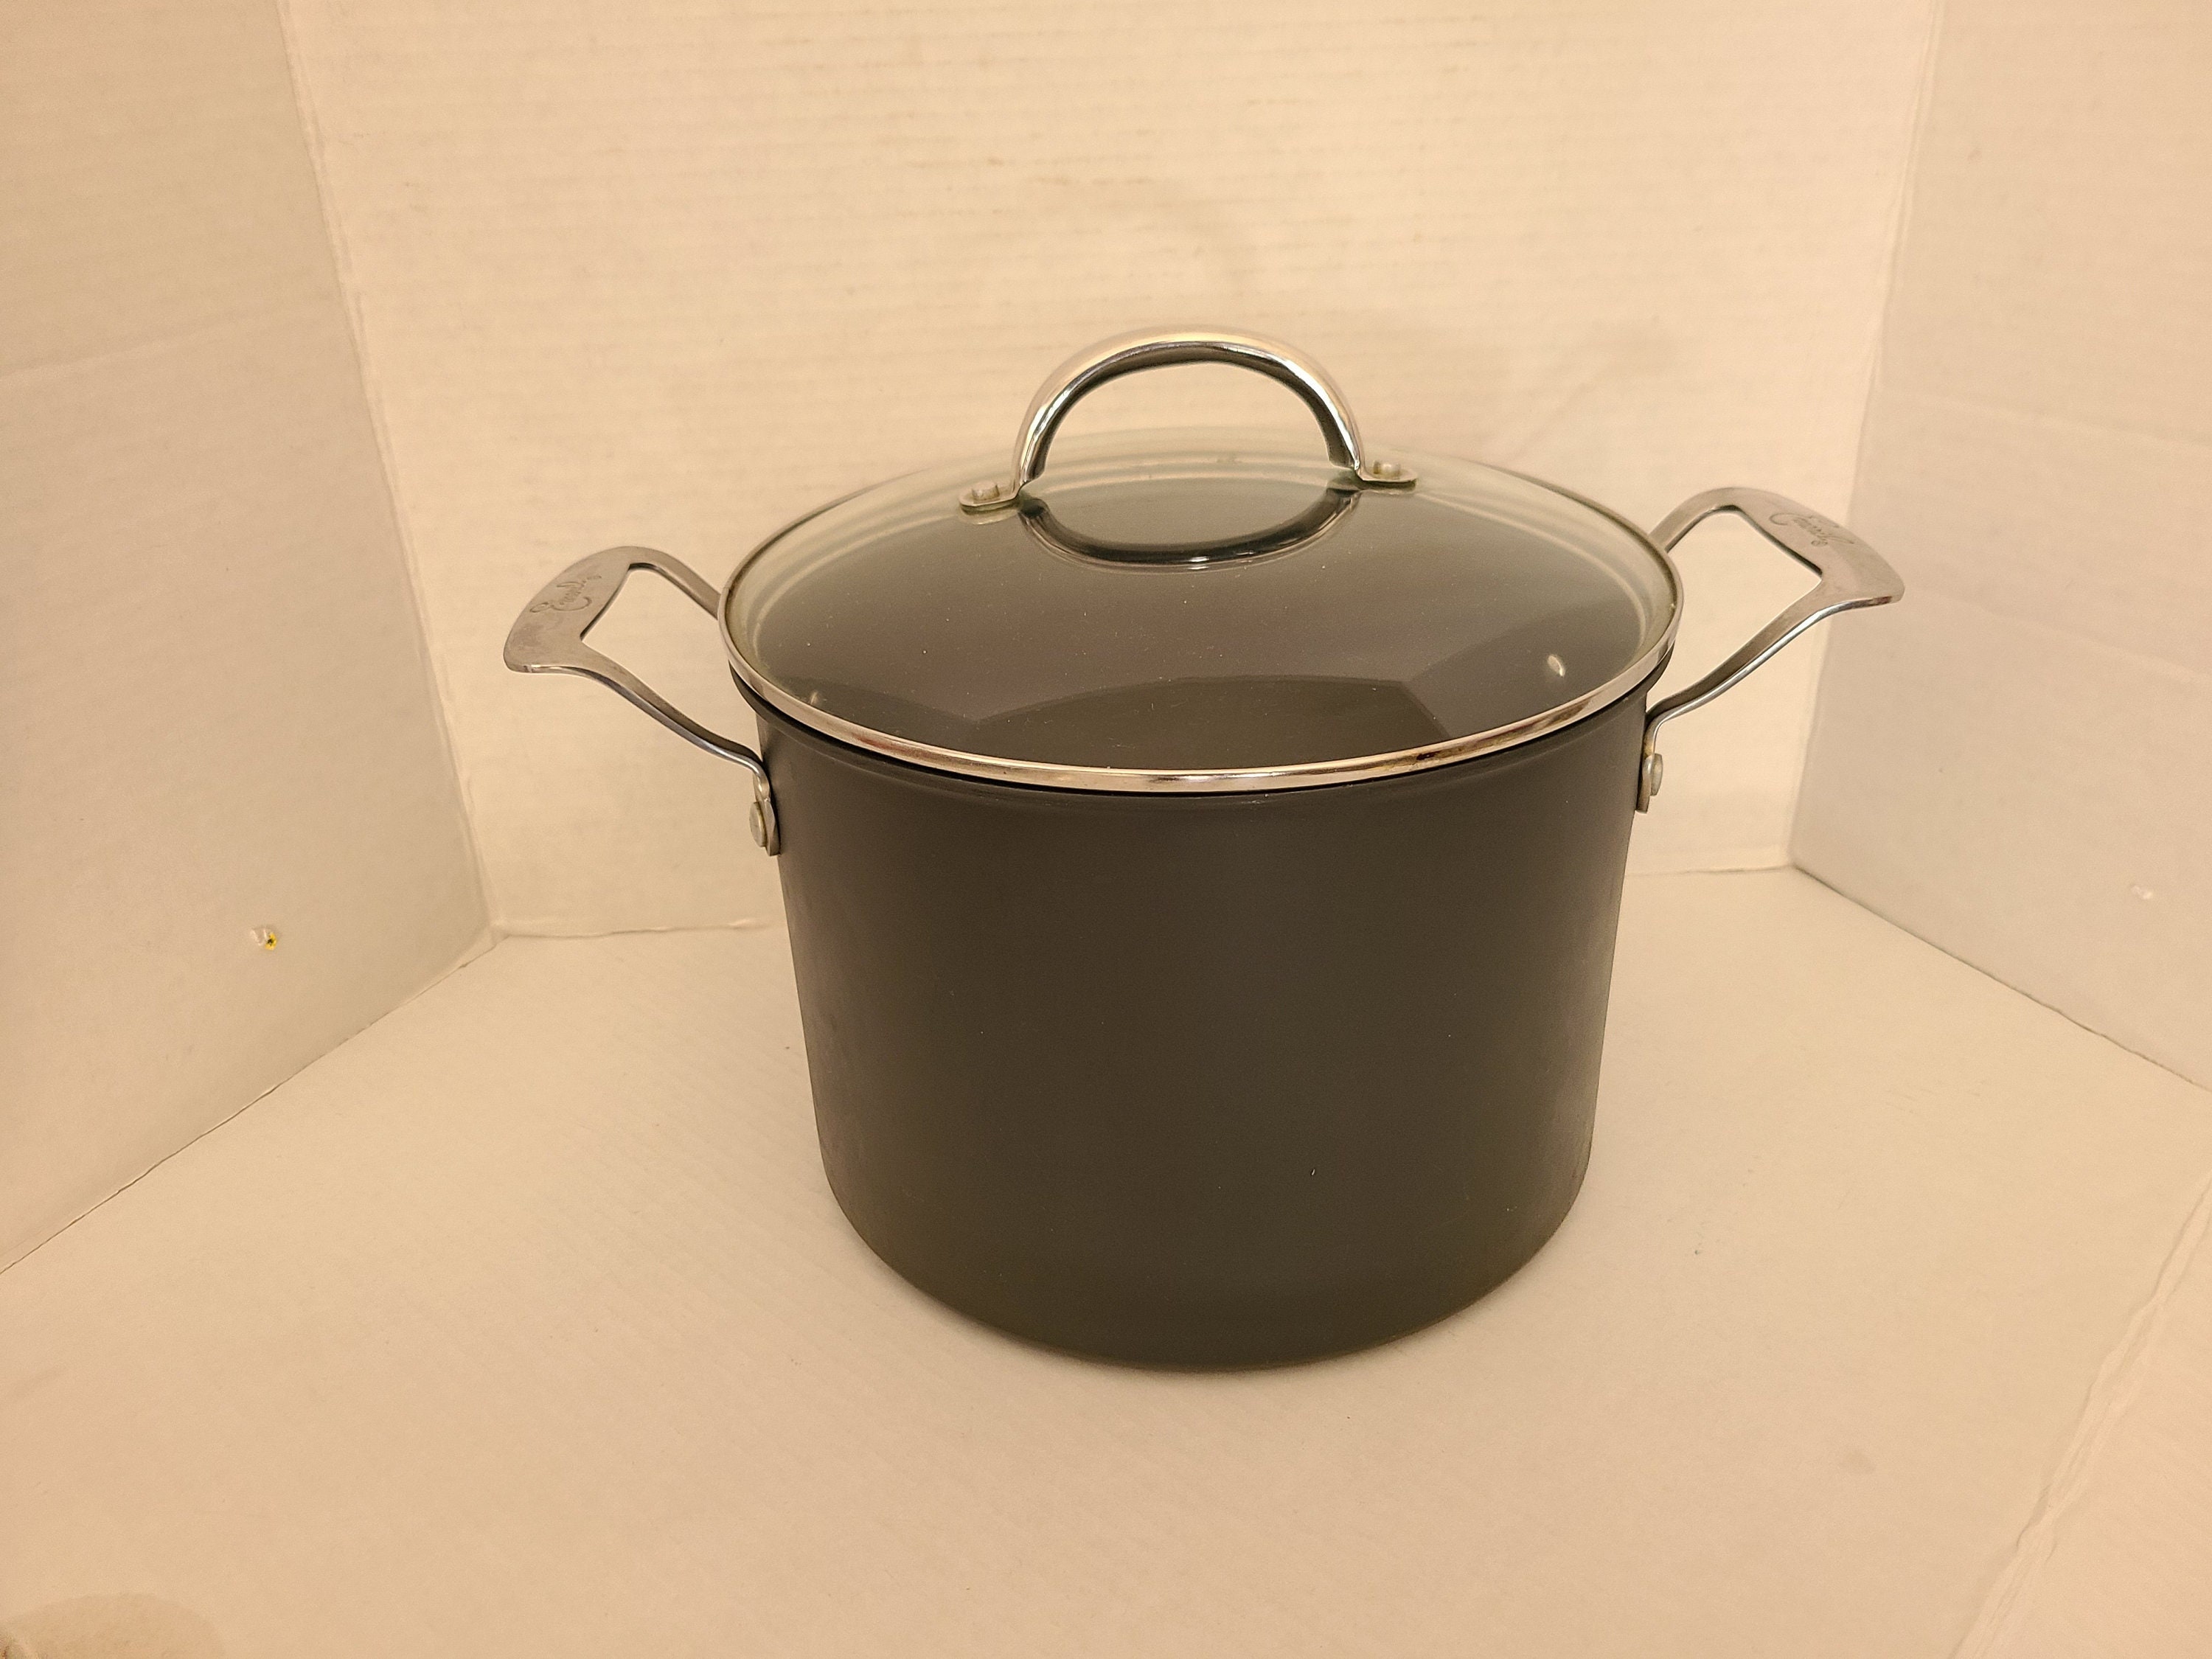 Emeril Lagasse Stainless 3 Quart Cooking Sauce Pan with Pour Spout  Straining Lid